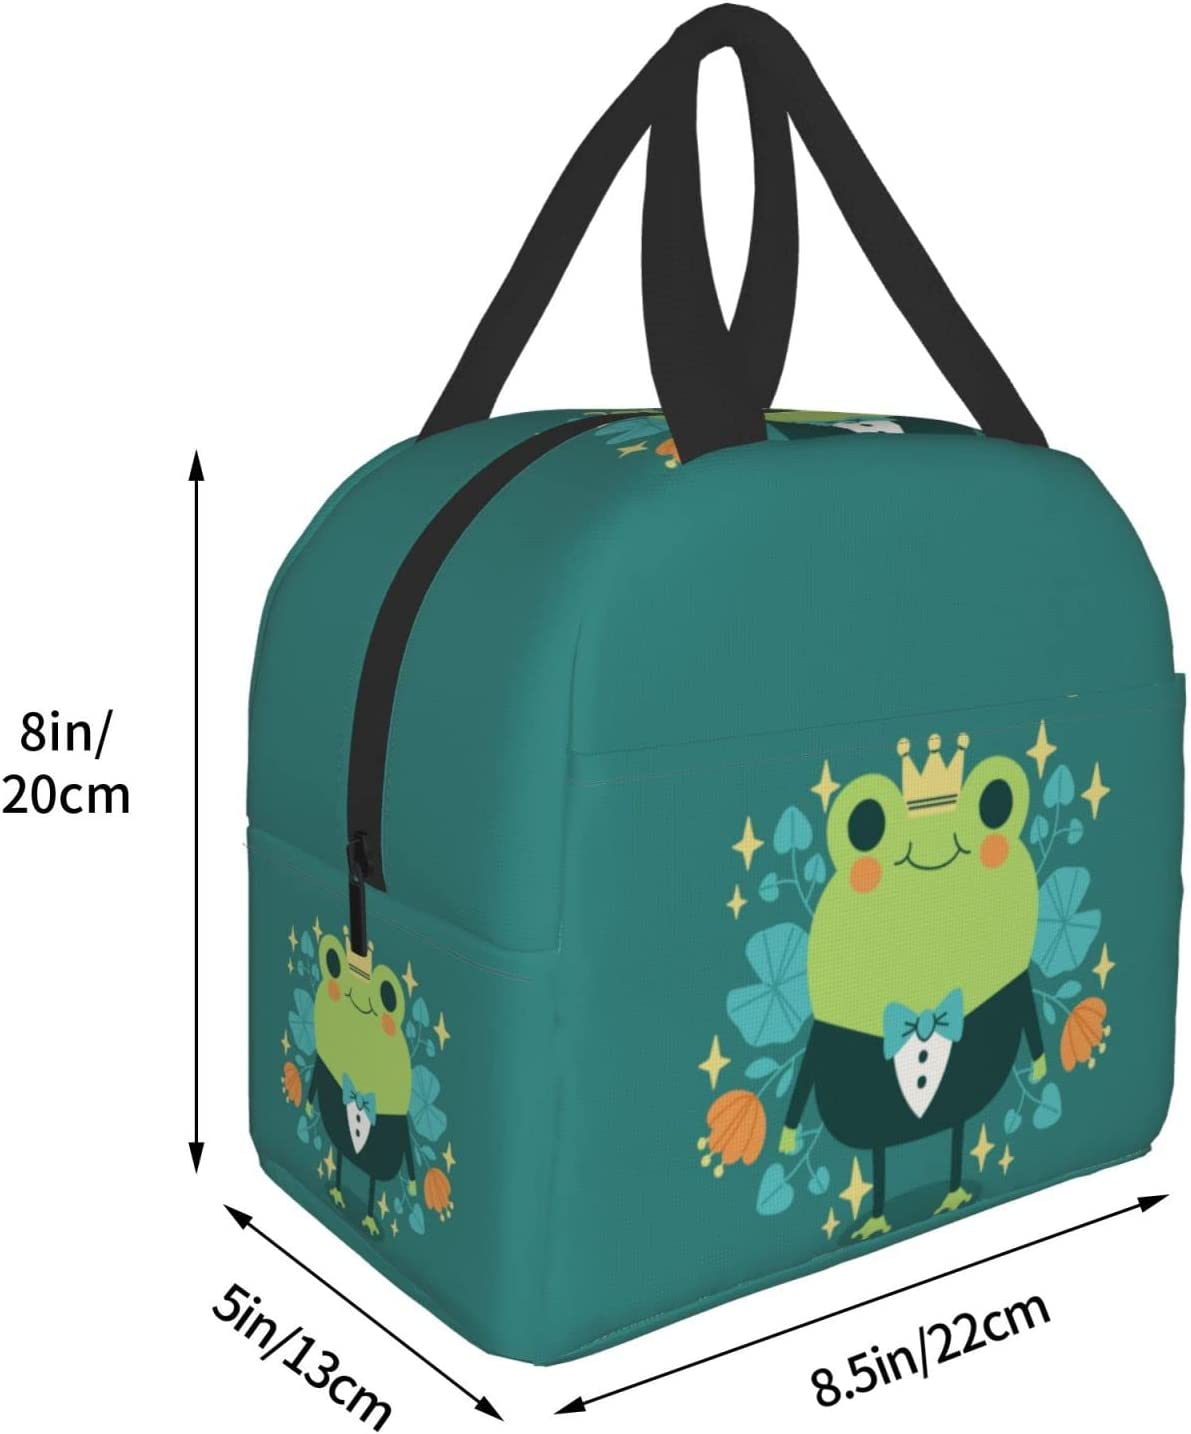 Cute Frog with Big Eyes Print Thermal Lunch Bag Insulated Bento Box Reusable Waterproof Lunch Bag for Office Picnic Hiking Beach